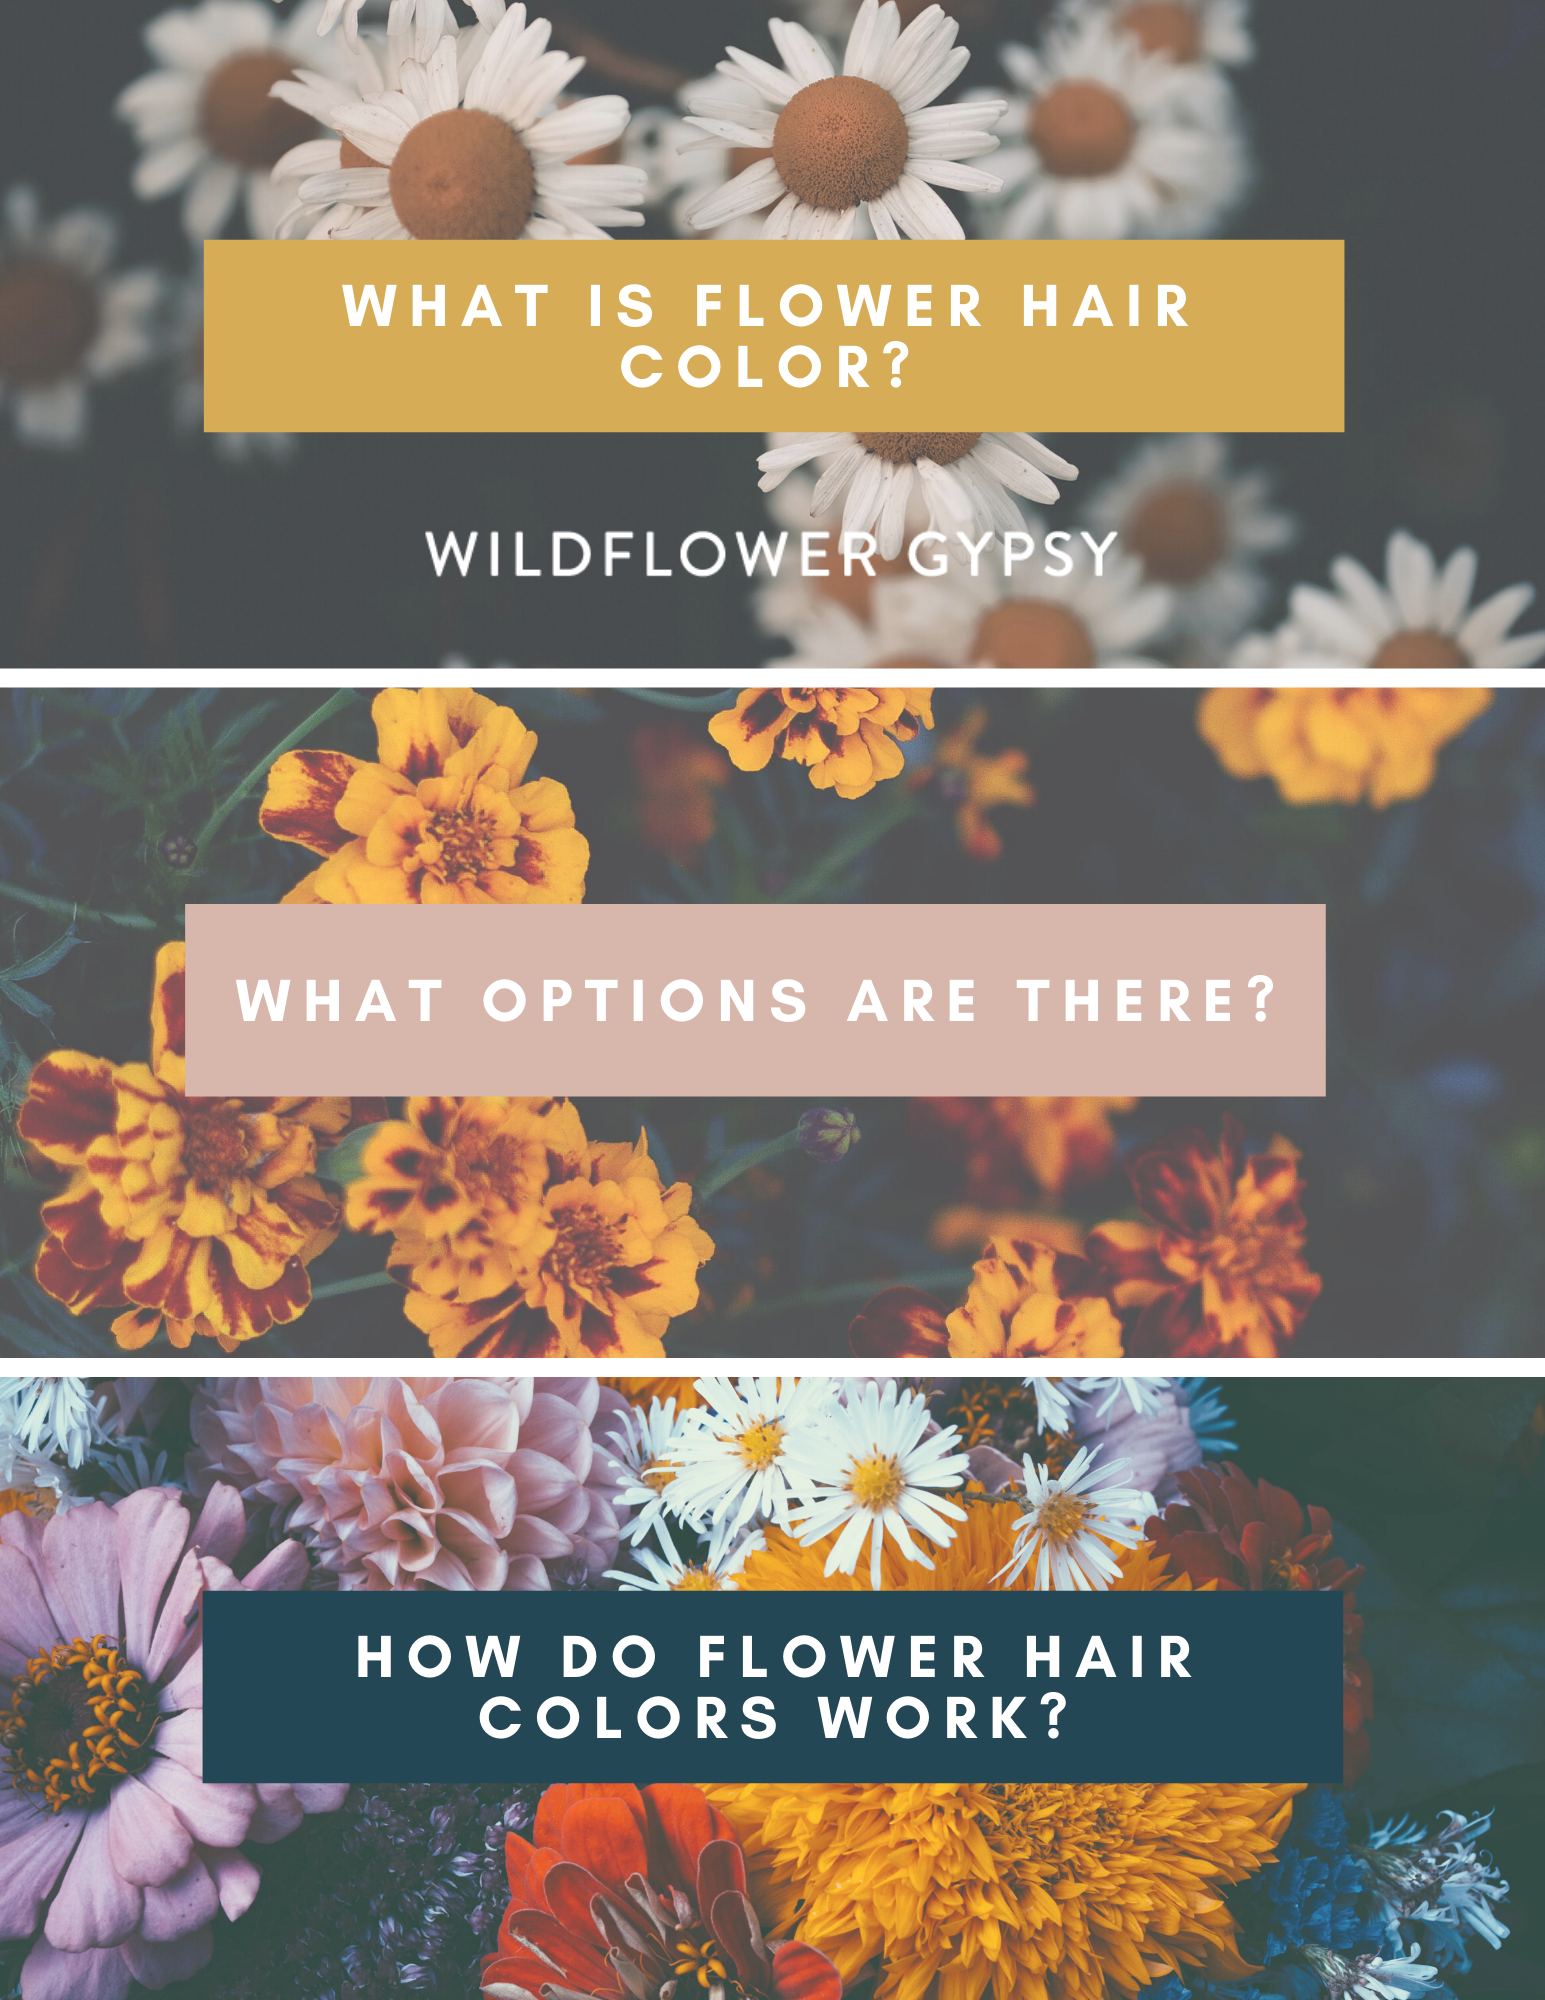 What is Flower Hair Color?